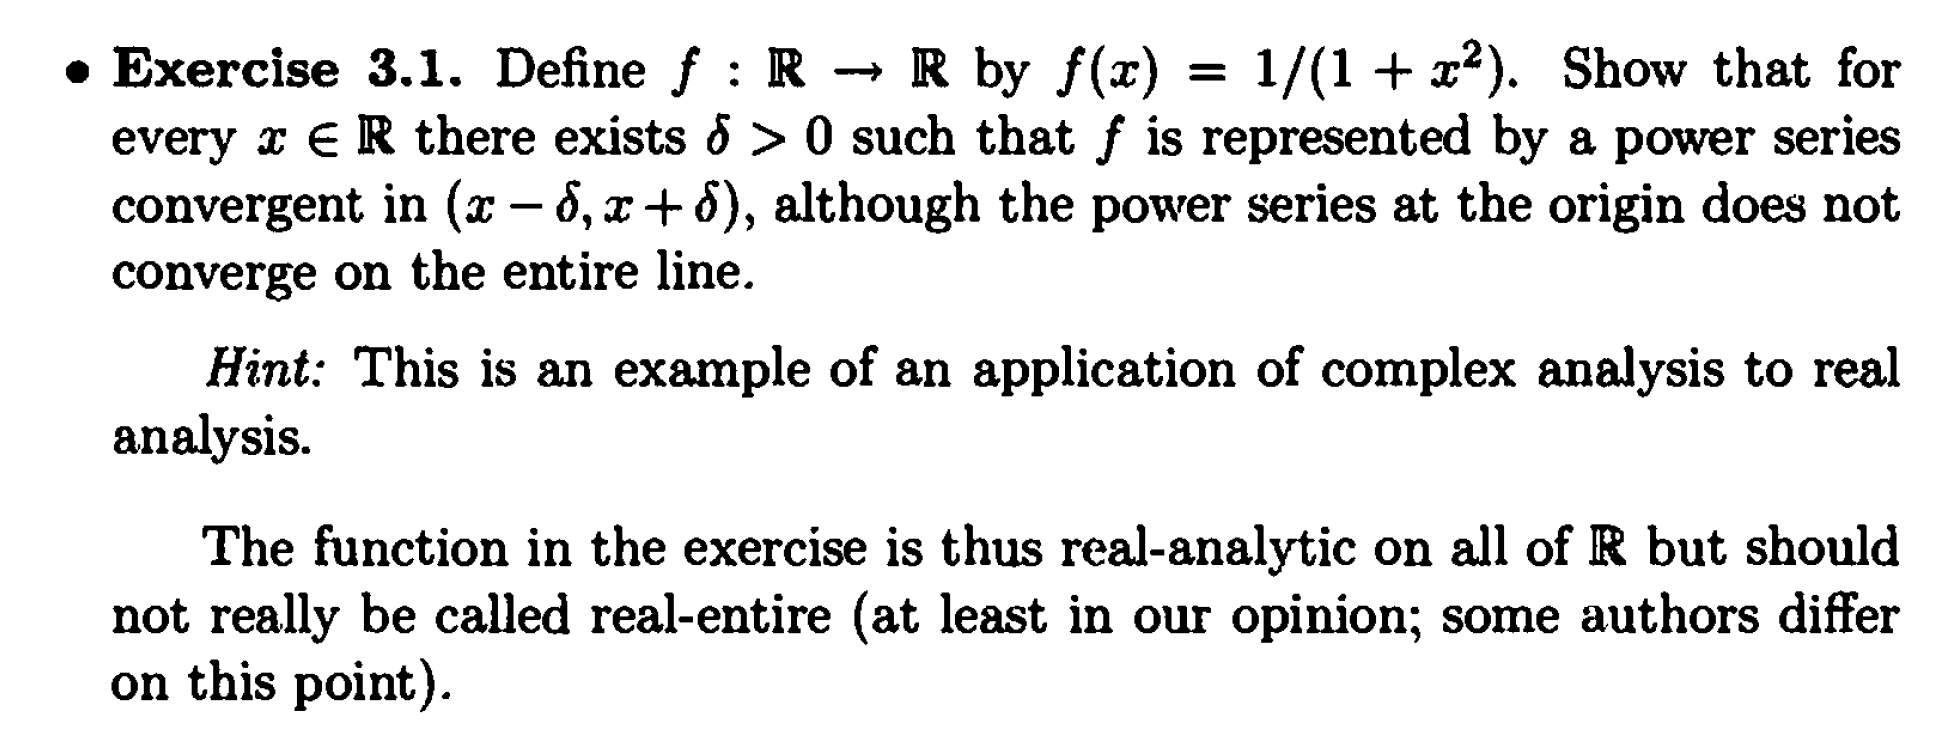 • Exercise 3.1. Define f : R → R by f(x)
1/(1 + x2). Show that for
every x ER there exists & > 0 such that f is represented by a power
series
convergent in (x – 6, x+8), although the power series at the origin does not
converge on the entire line.
